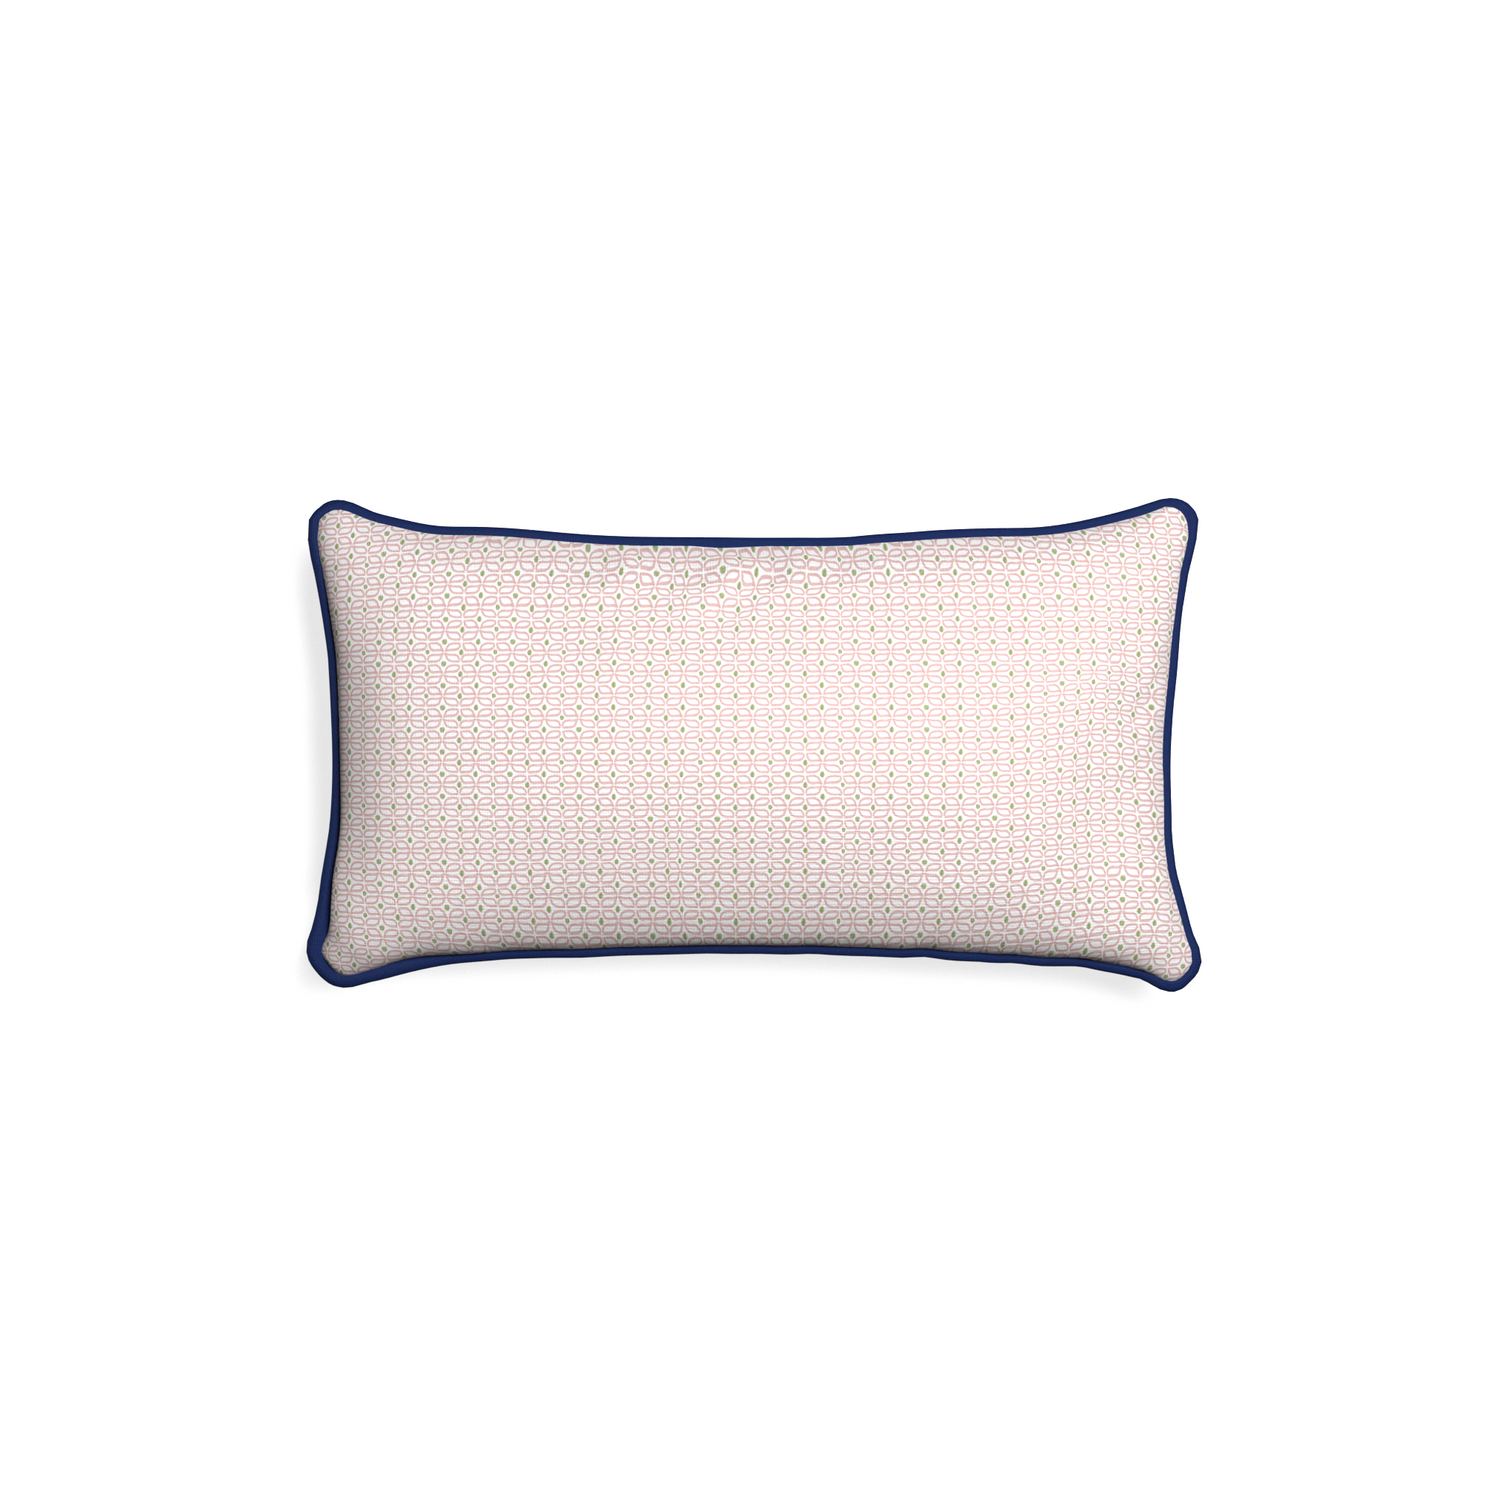 Petite-lumbar loomi pink custom pink geometricpillow with midnight piping on white background